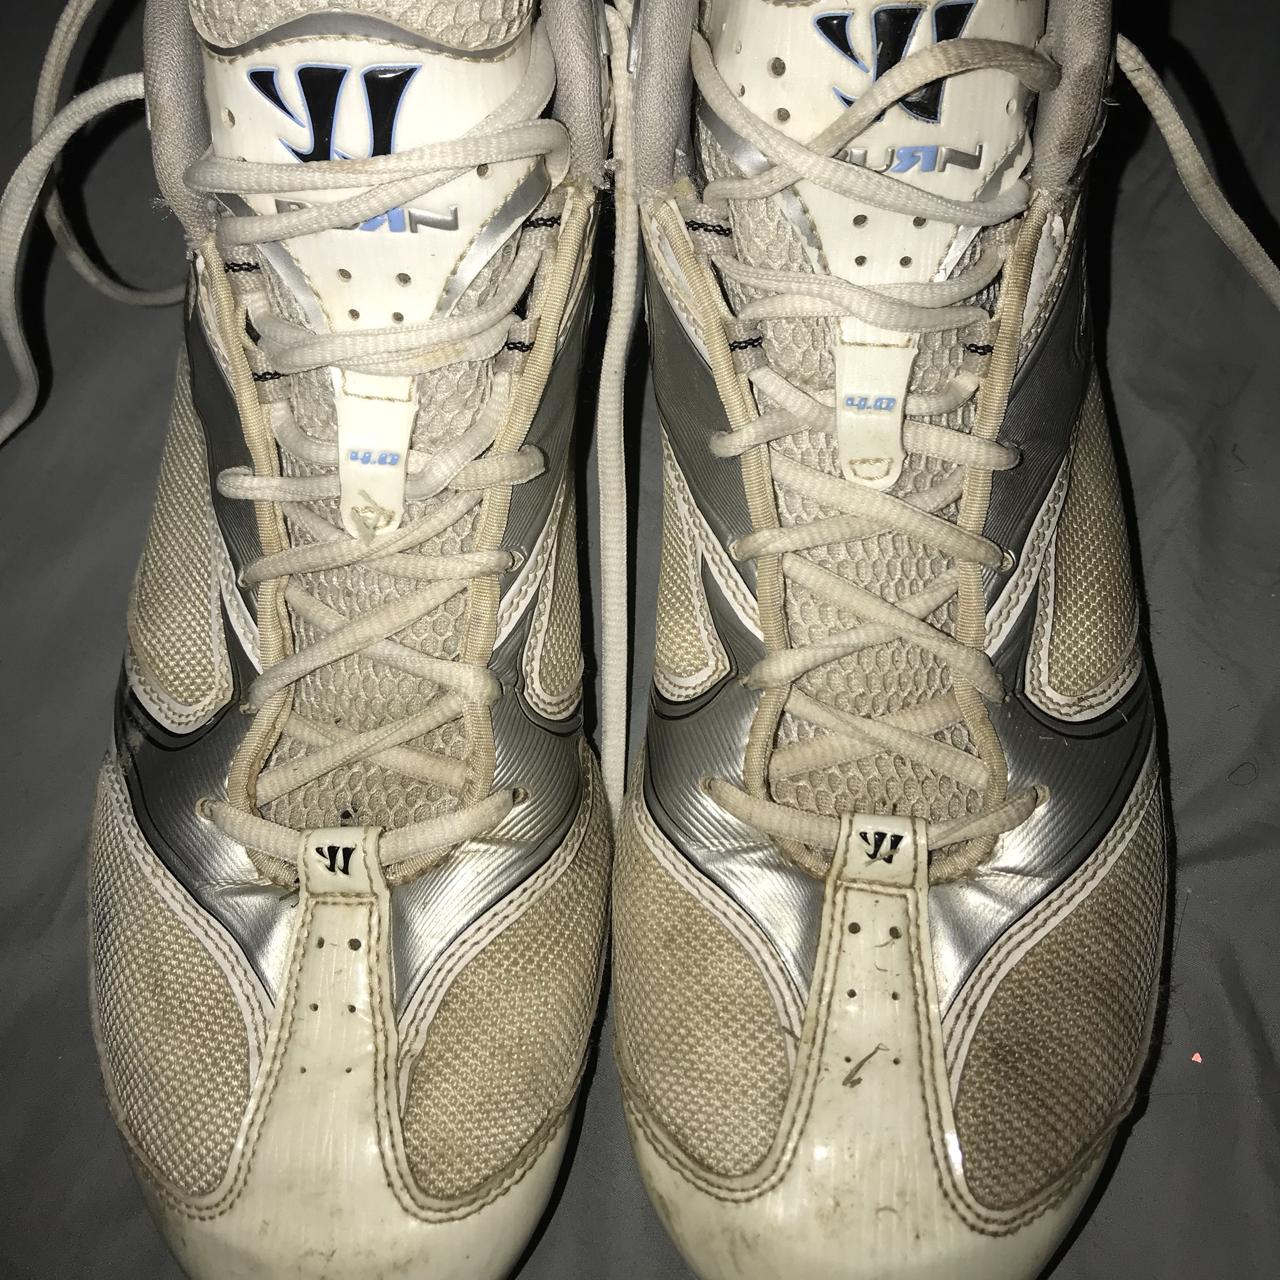 commentator Wacht even specificatie Warrior lacrosse cleats. They're in great condition,... - Depop